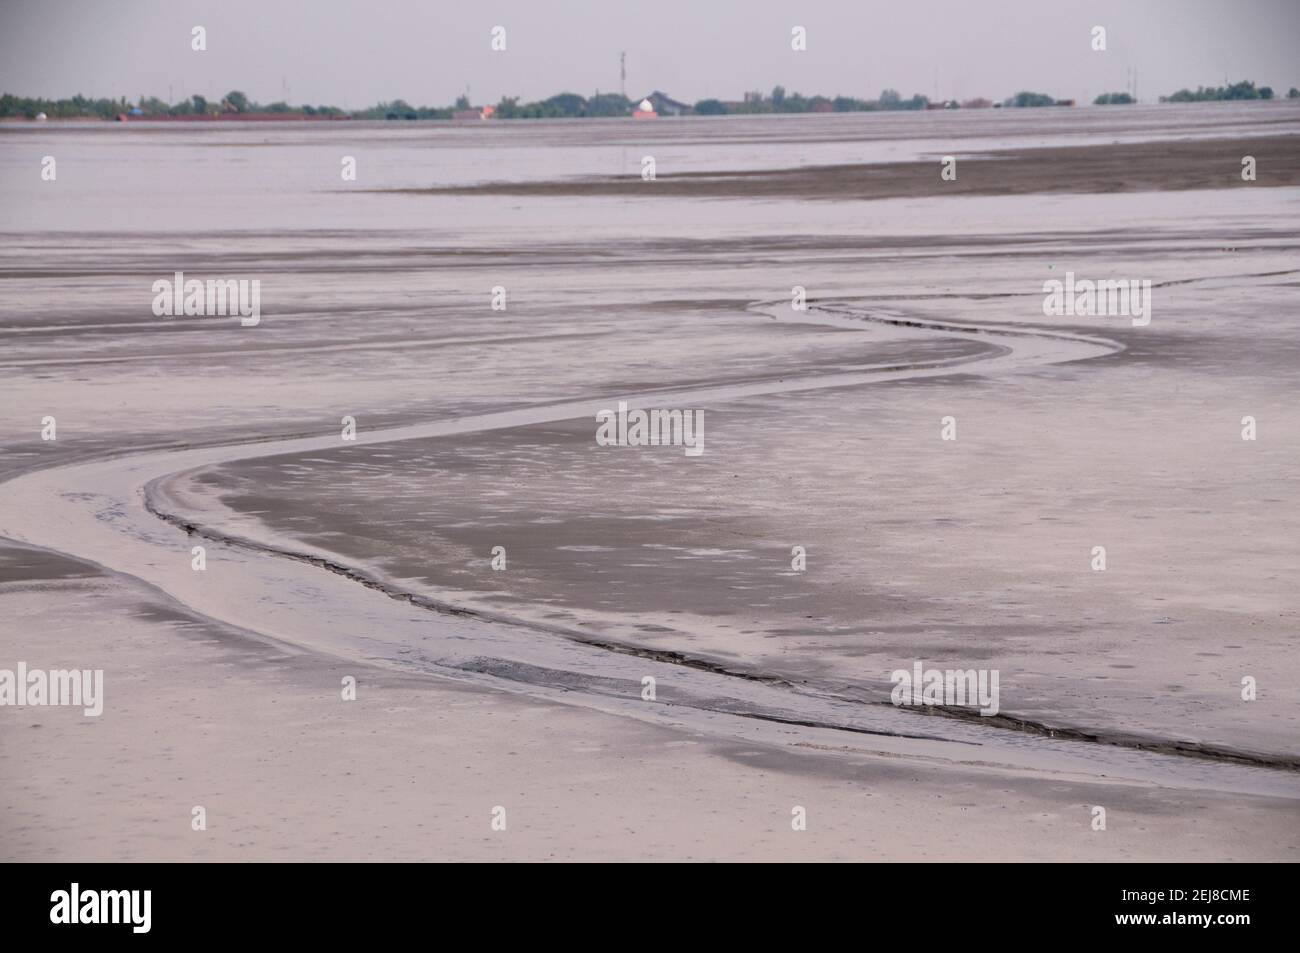 Channels in mud lake from environmental disaster which developed after drilling incident, Porong Sidoarjo, near Surabaya, East Java, Indonesia Stock Photo